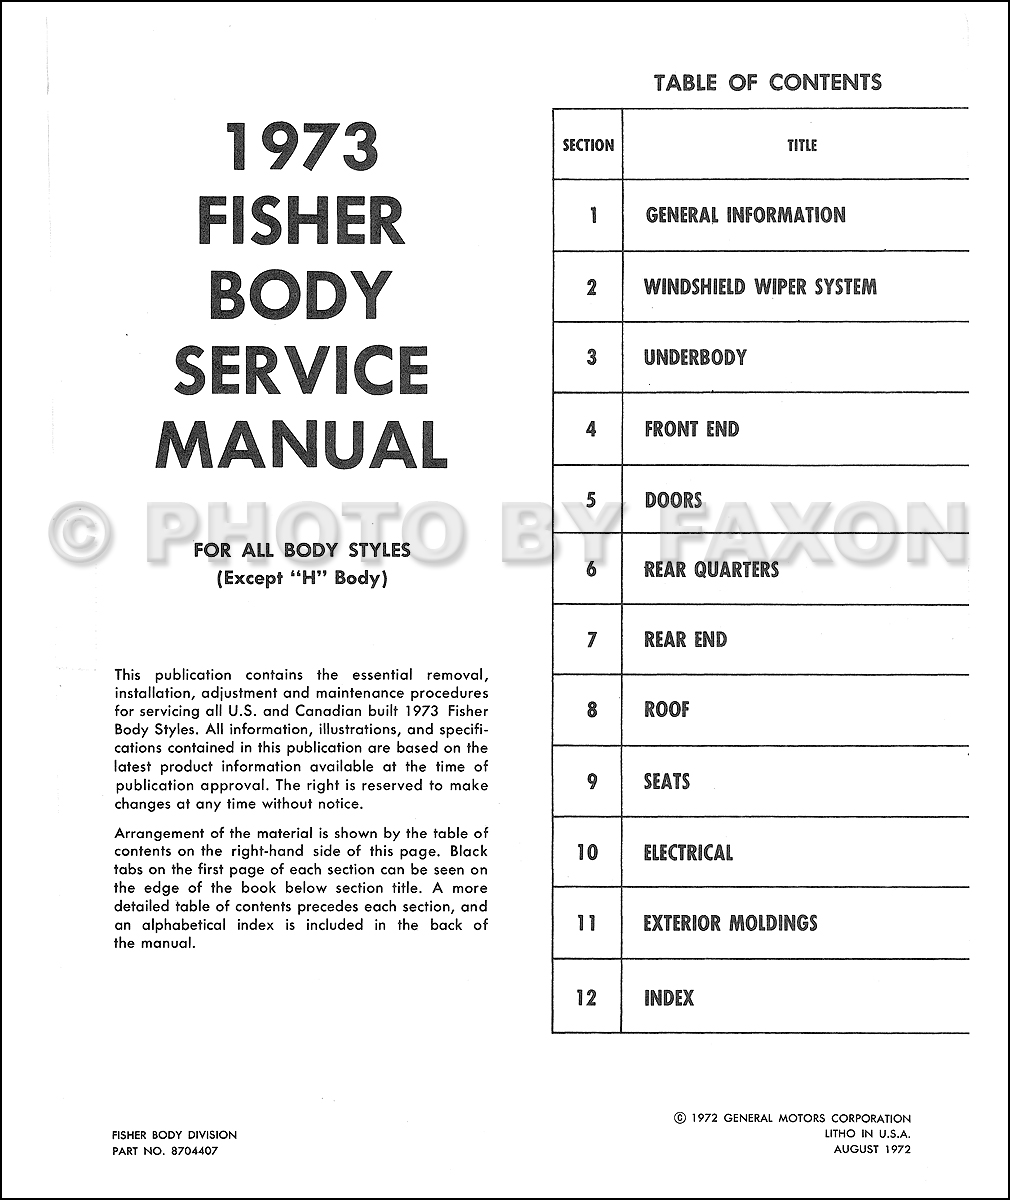 Body Manual Table of Contents